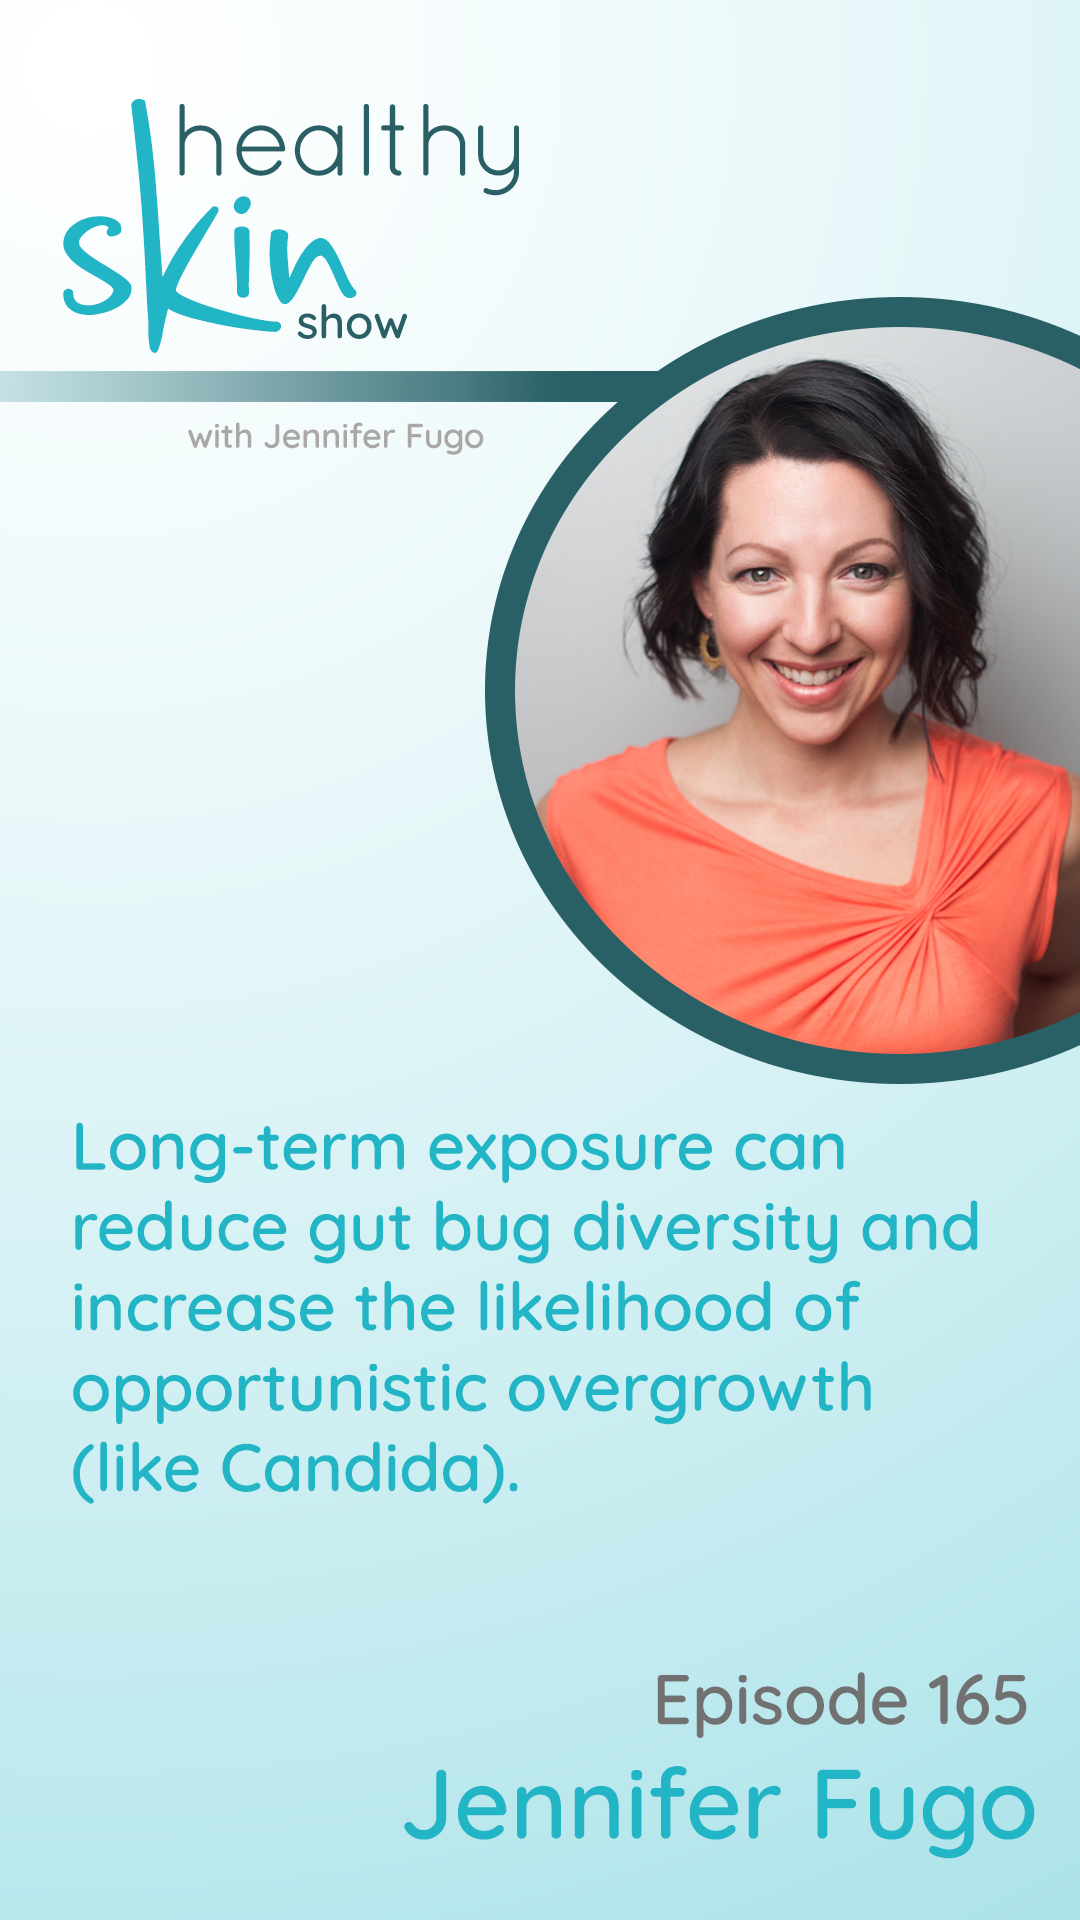 Long-term exposure can reduce gut bug diversity and increase the likelihood of opportunistic overgrowth (like Candida).